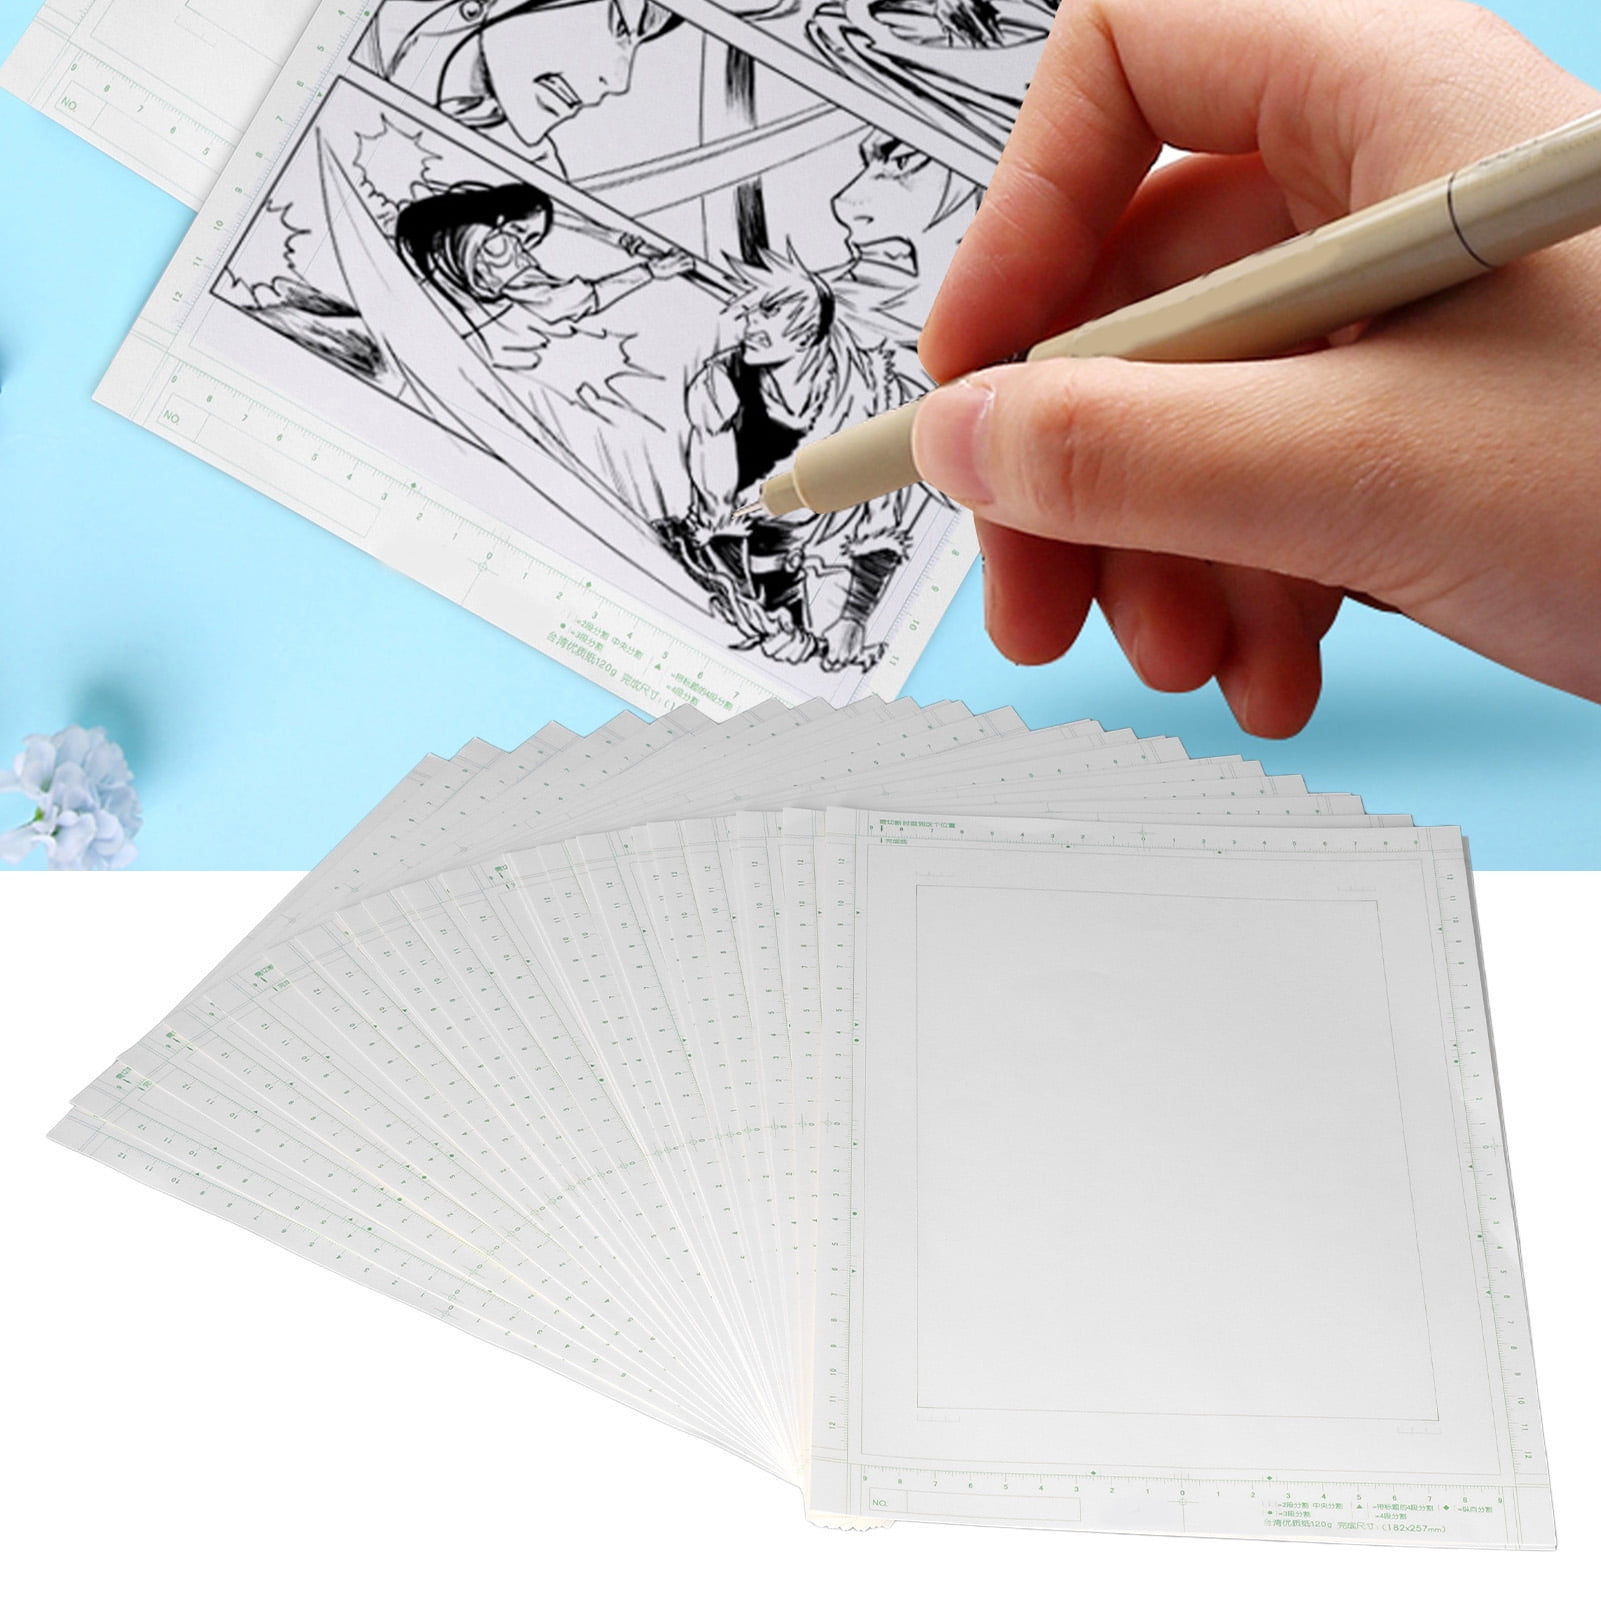 ANGGREK Drawing Paper Bulk,Painting Paper,Drawing Paper Glue Treatment  Clear Scale Small Volume Light Weight Scale Label Sketch Paper